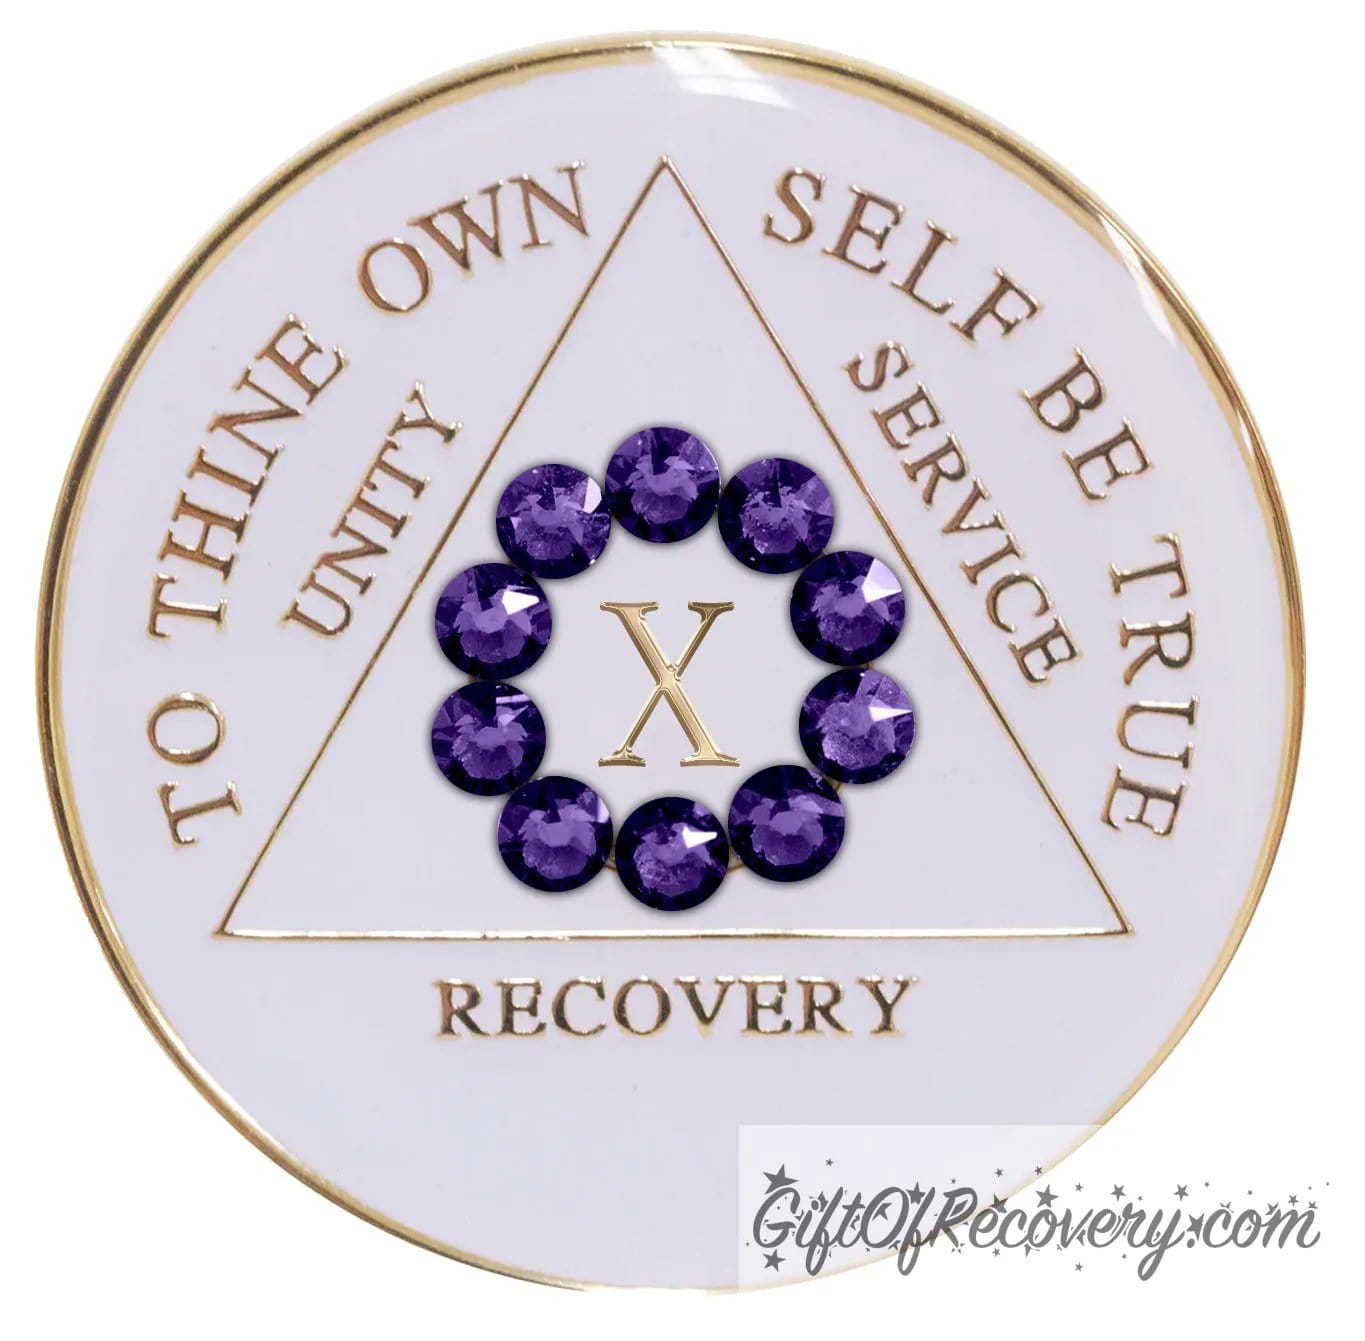 10 year AA medallion in pearl white with ten genuine purple velvet crystal in a circle representing our common welfare and personal recovery, to thine own self be true and other AA moto embossed with 14k gold-plated brass, the recovery medallion is sealed with resin for a scratch free shiny finish.